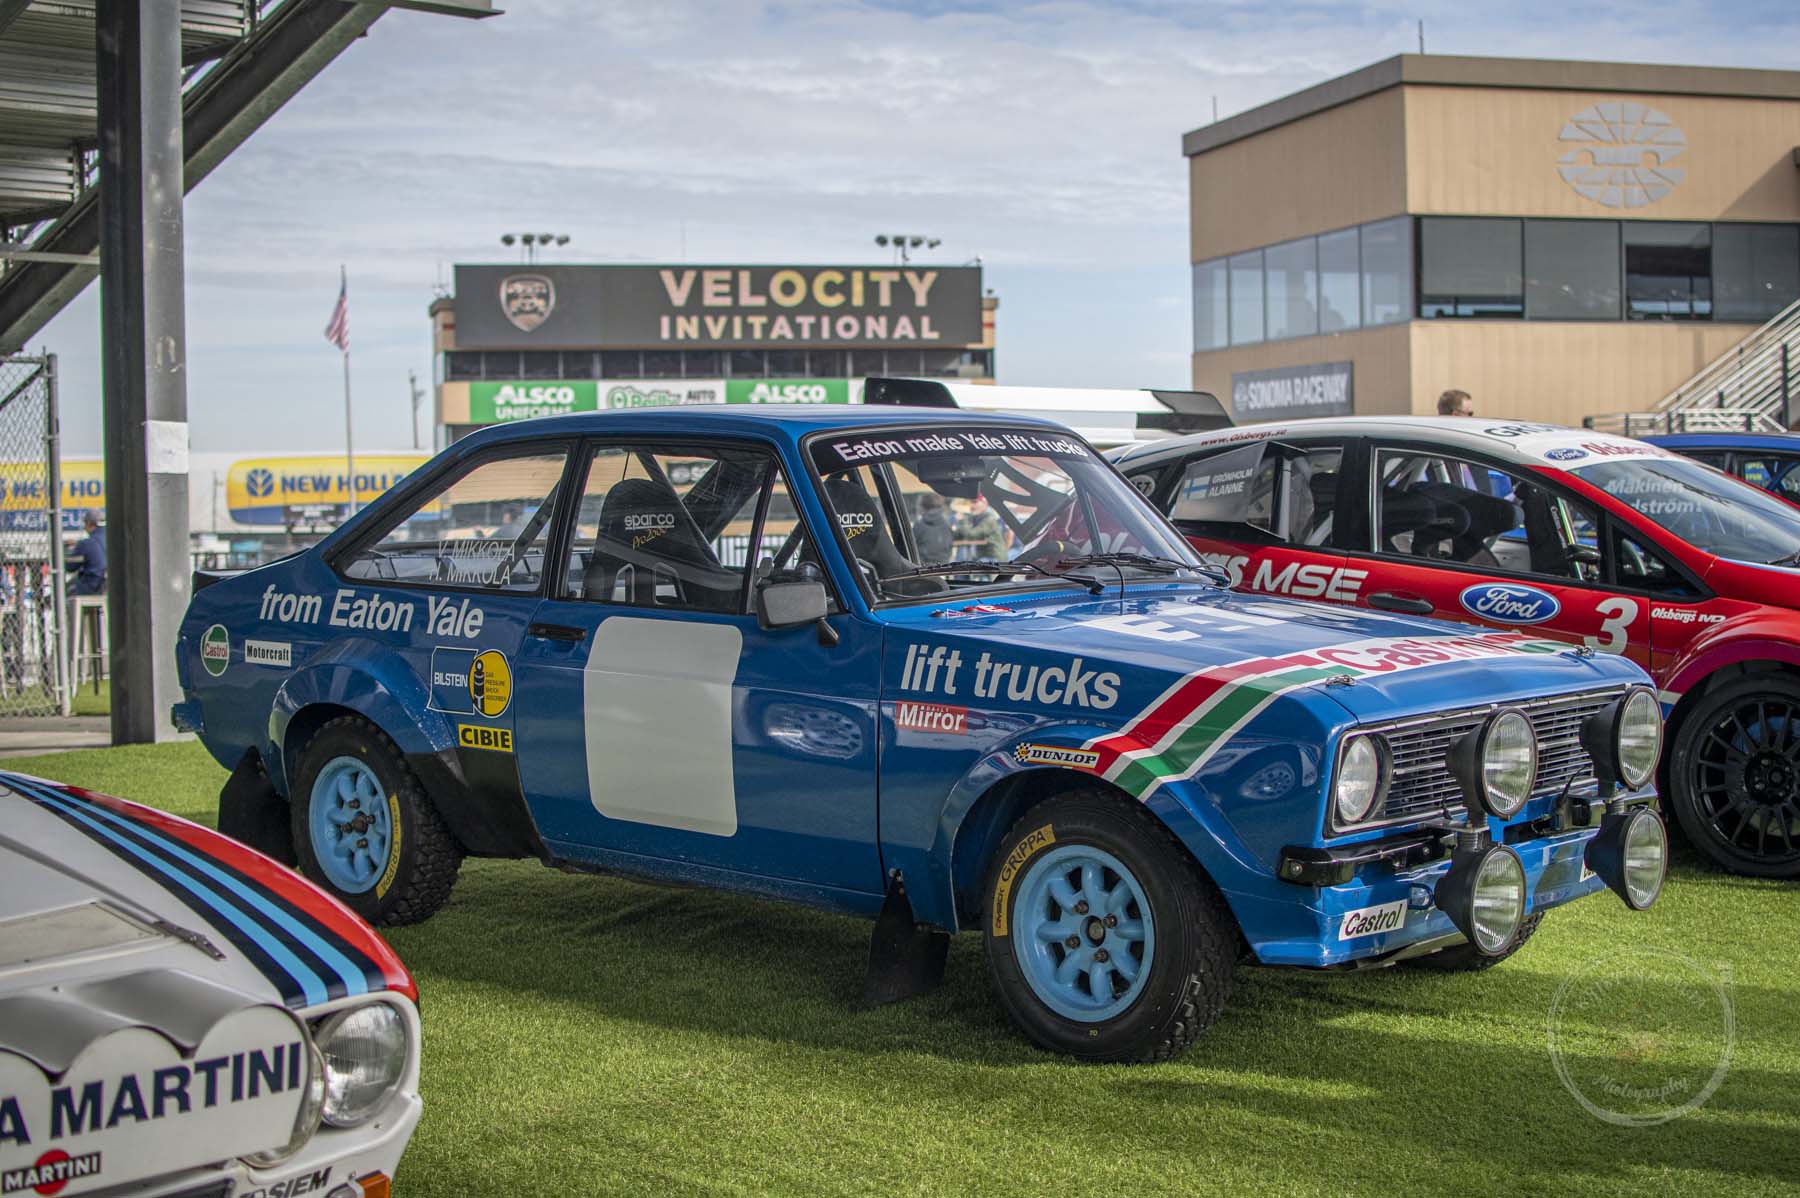 The Eaton Yale Ford Escort MK2 on display with a variety of Dirtfish Rally cars at Velocity Invitational 